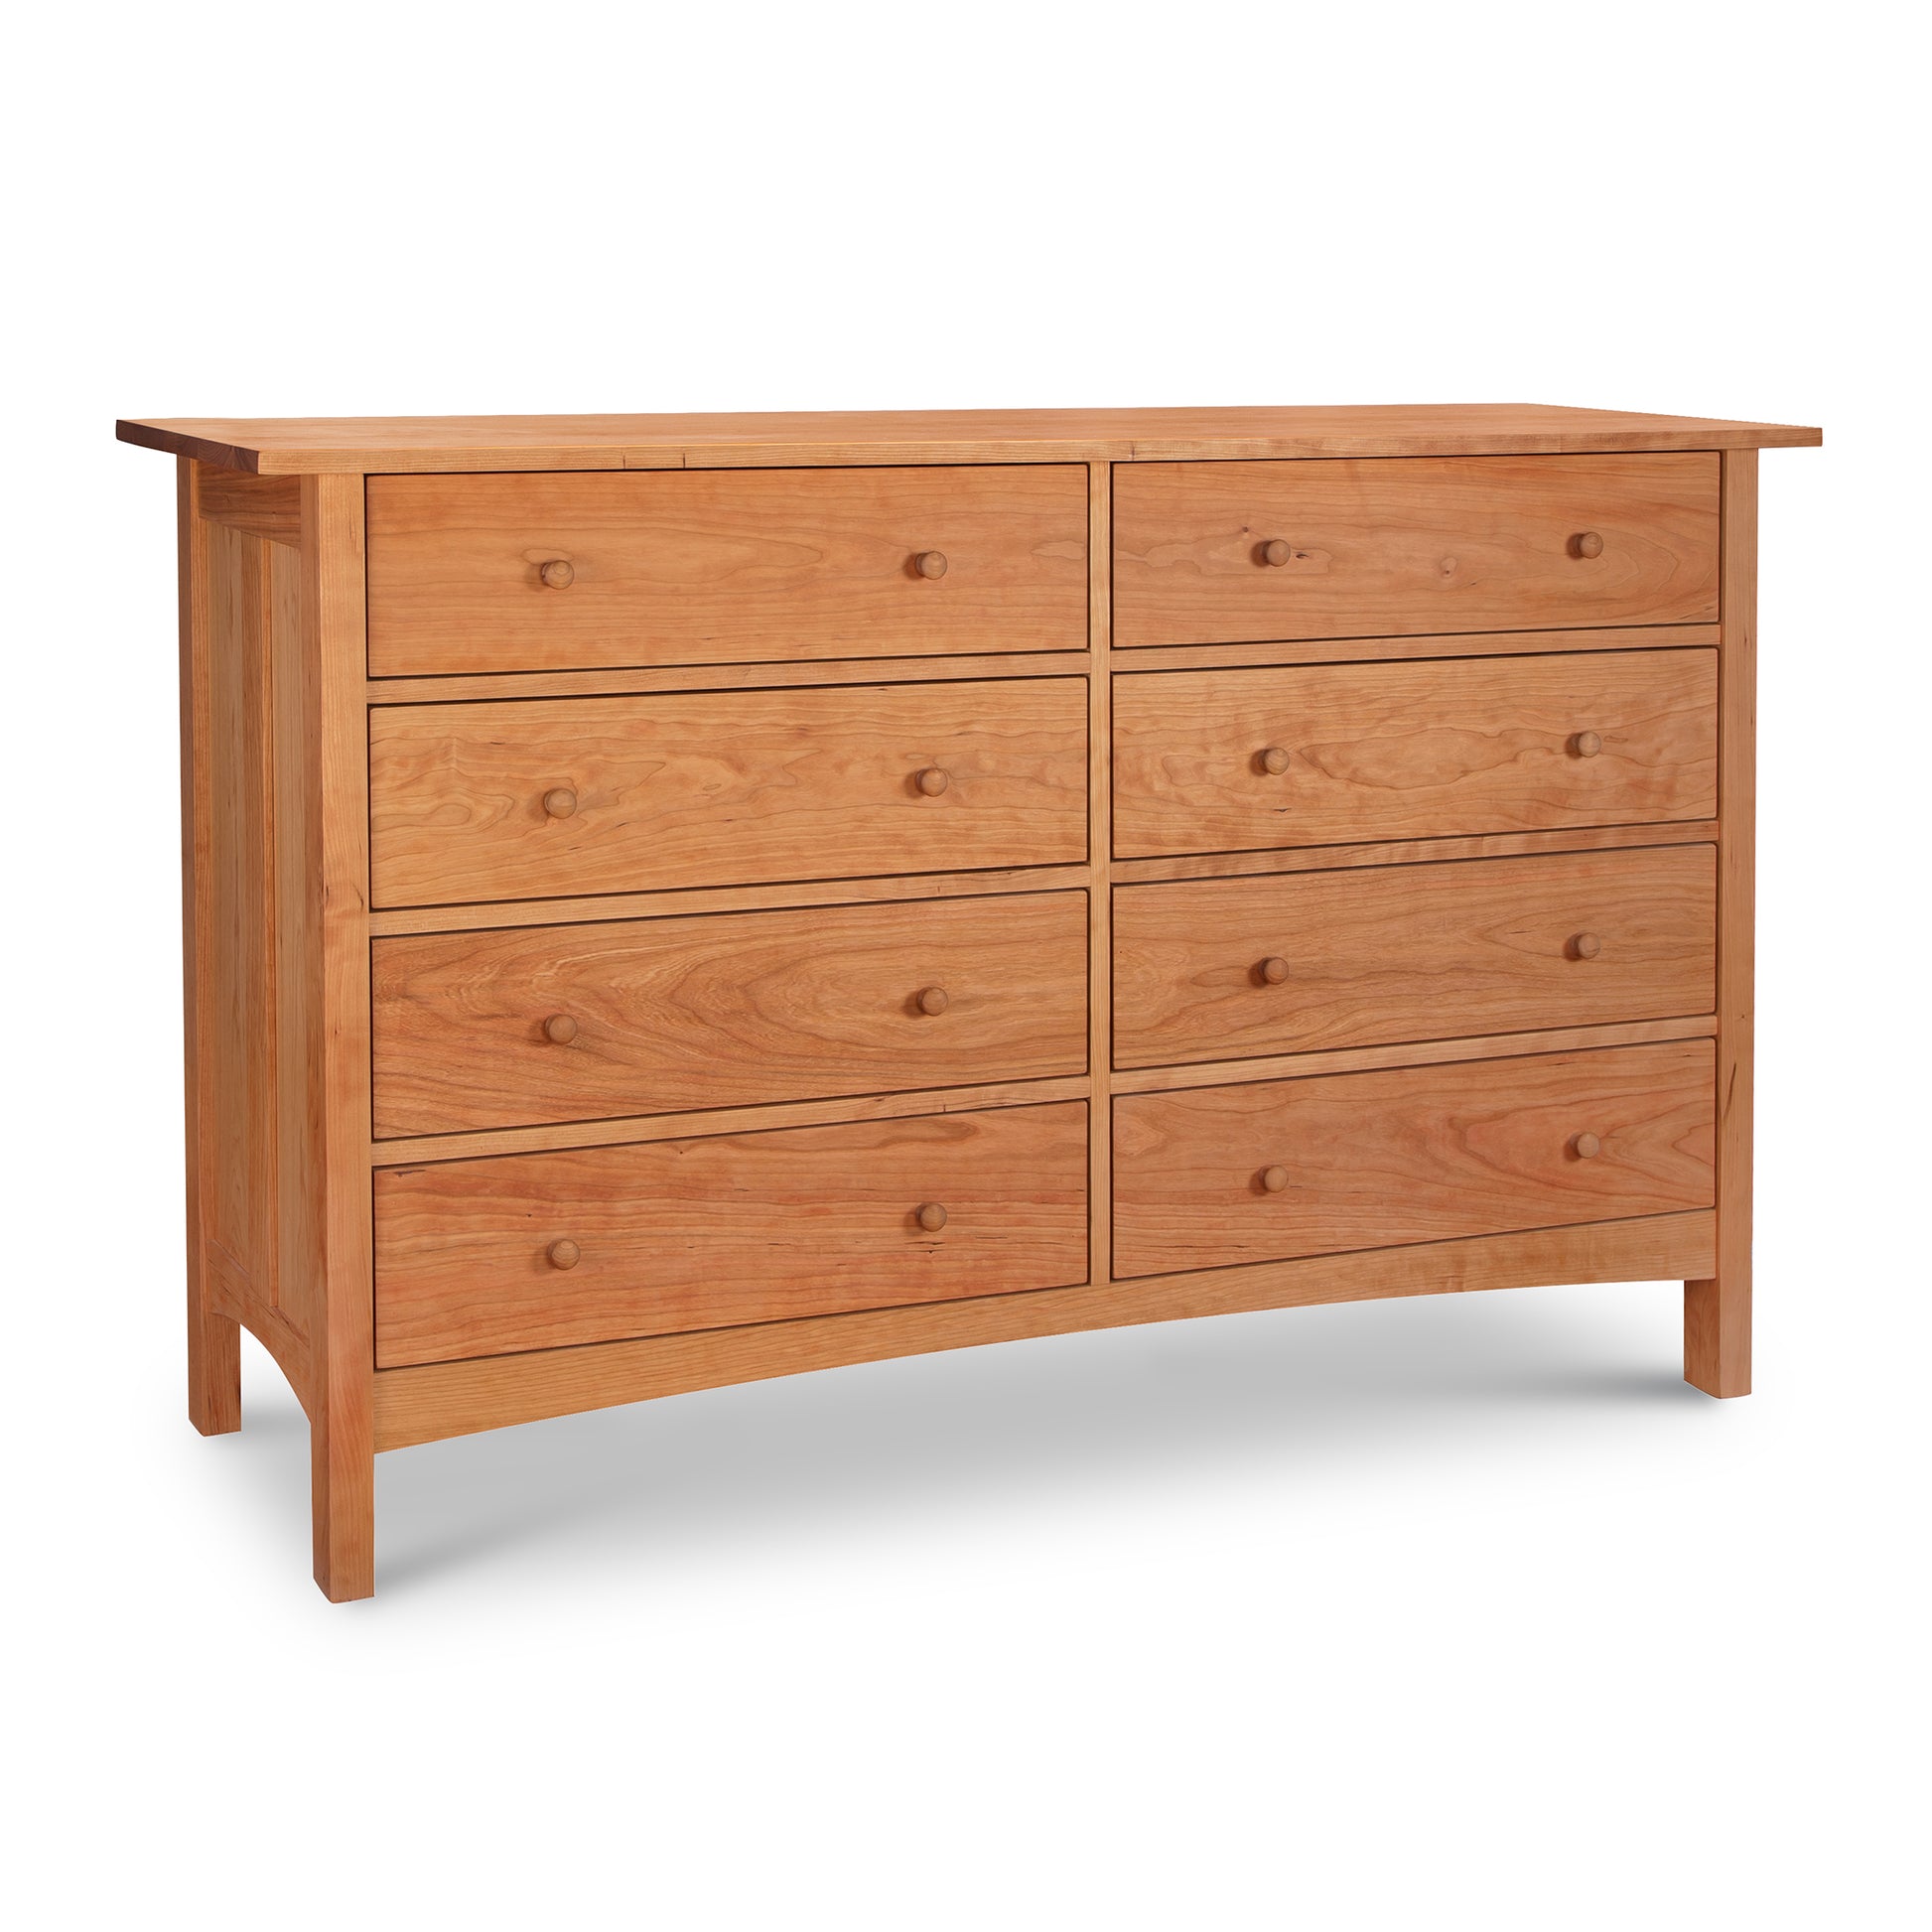 Burlington Shaker 8-Drawer Dresser #1 by Vermont Furniture Designs, featuring a simple design and hardwood construction, isolated against a white background. This piece is an eco-friendly dresser.